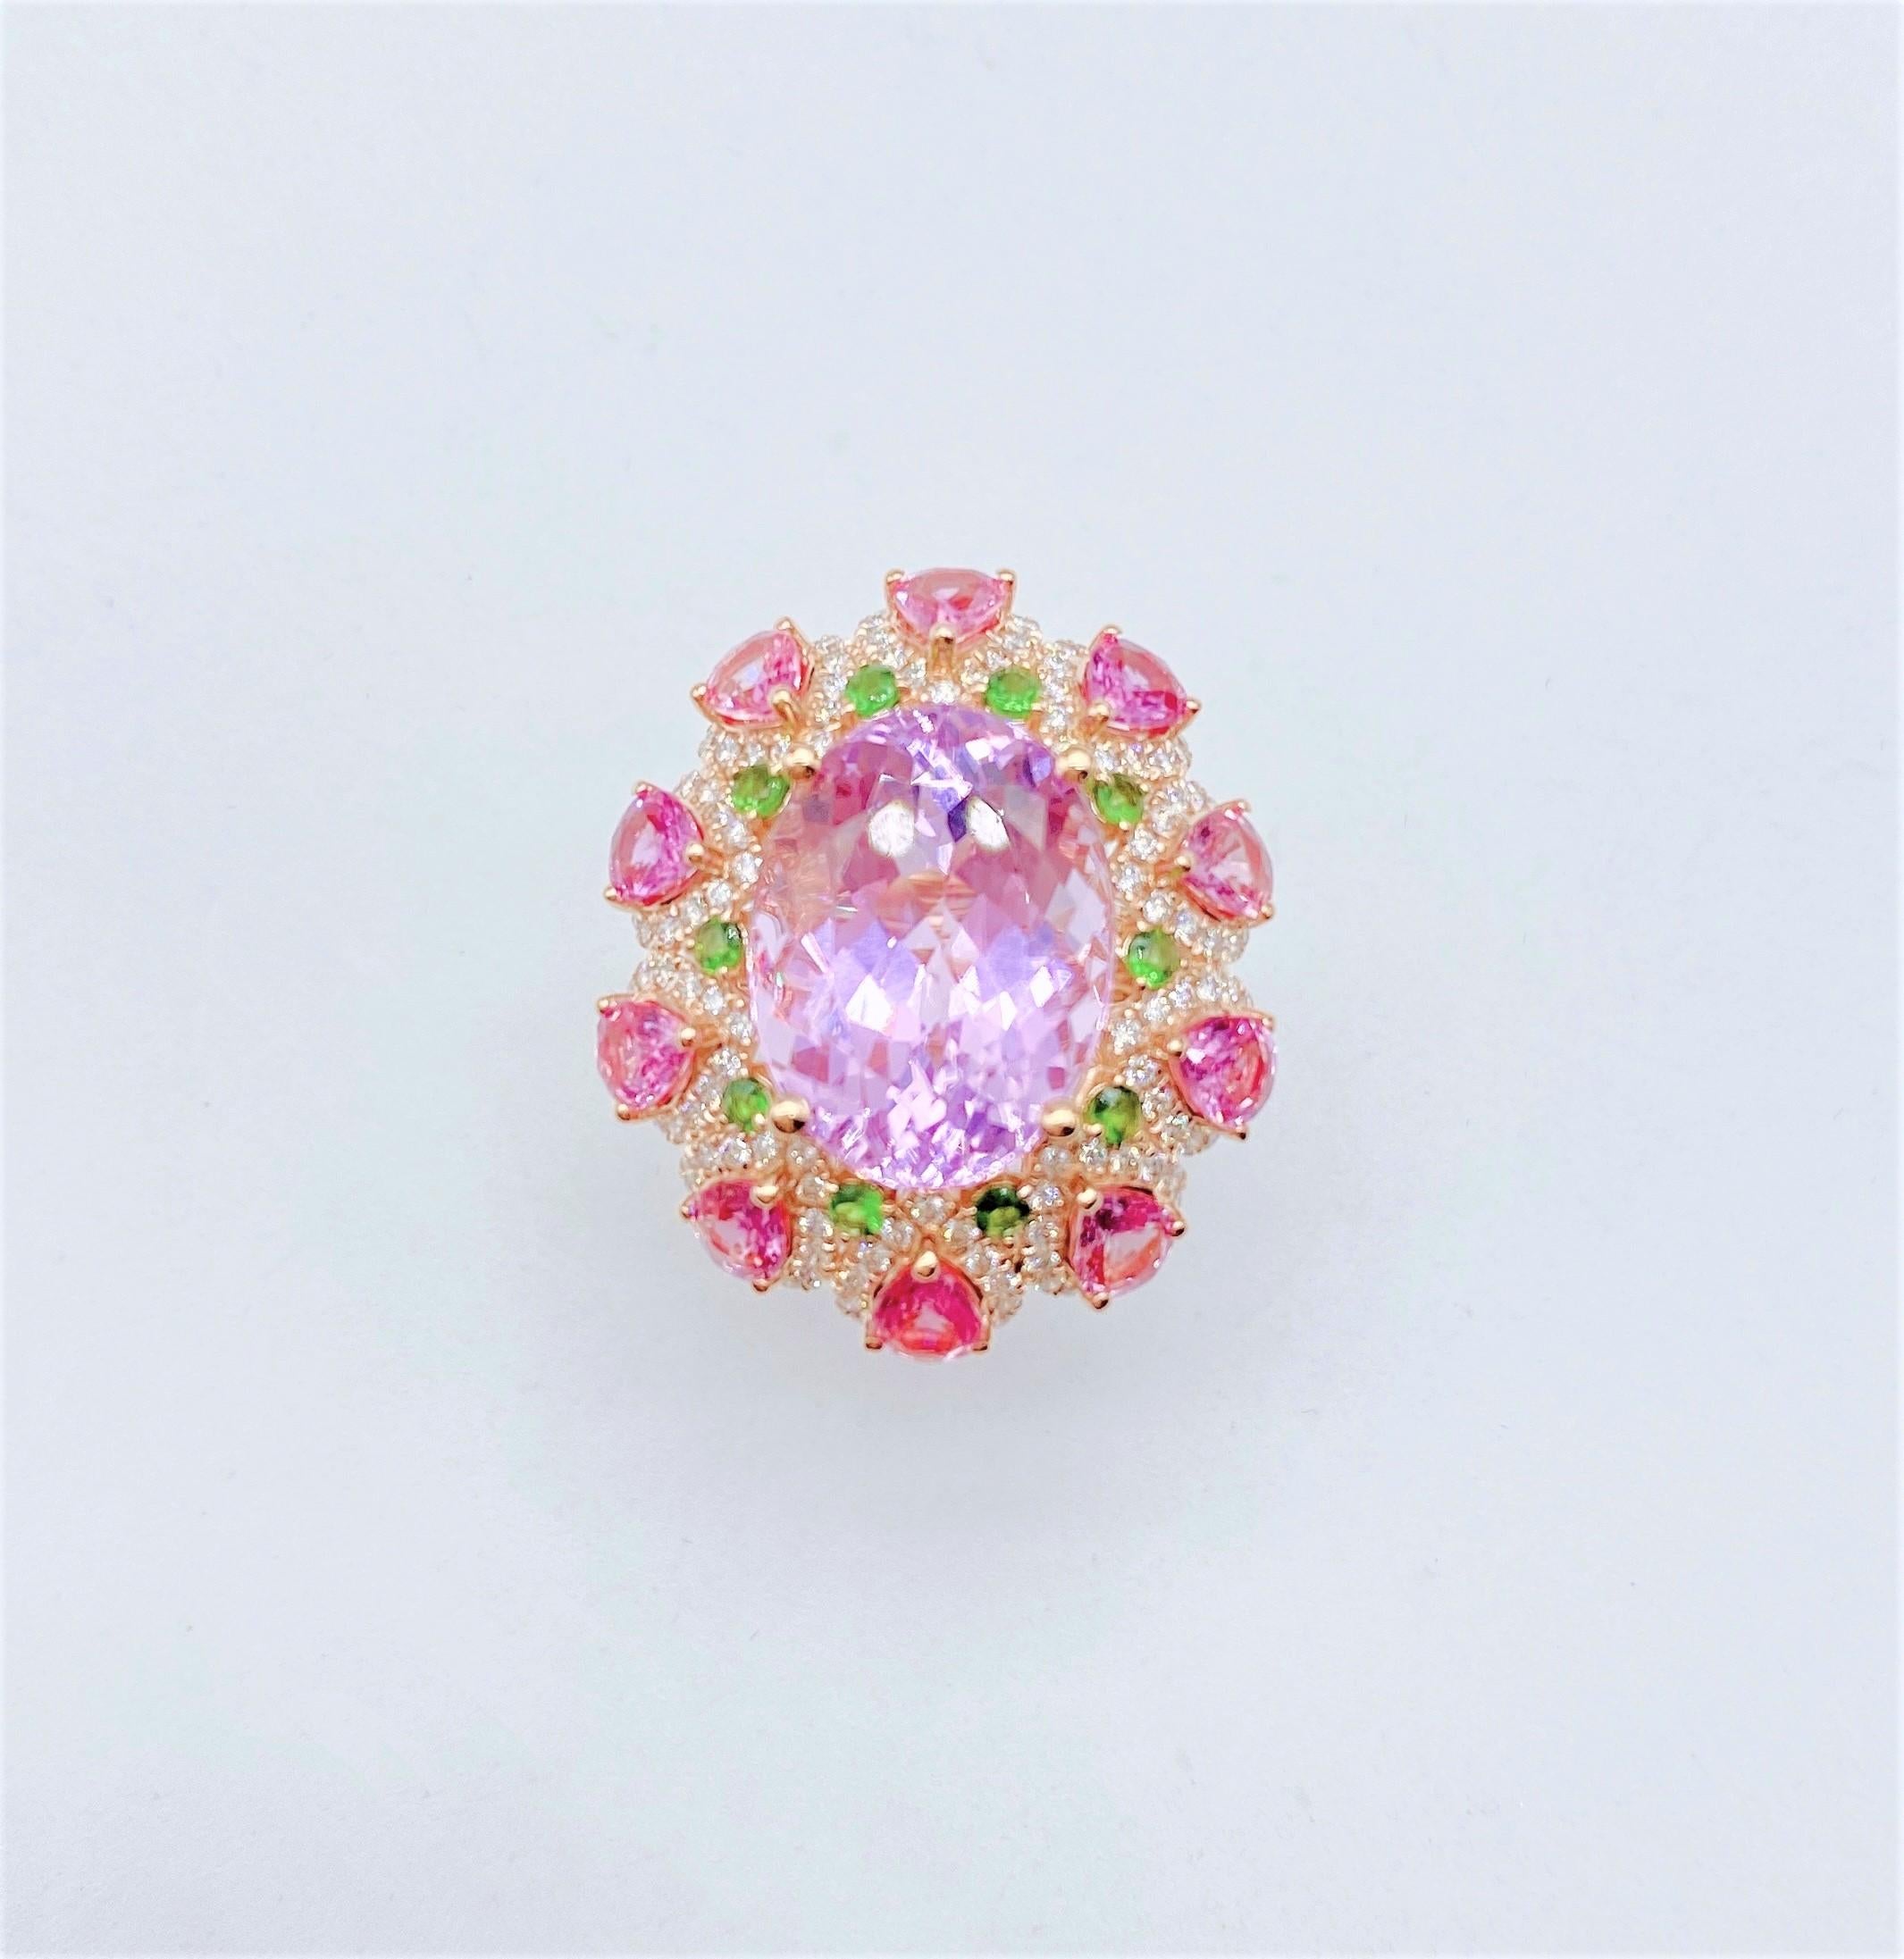 The Following Item we are offering is this Rare Important Radiant 18KT Gold Winston Style LARGE Glittering and Sparkling Magnificent Fancy Kunzite and Fancy Pink Sapphire and Green Sapphire White Diamond Ring. Ring Contains a Beautiful Fancy Shaped